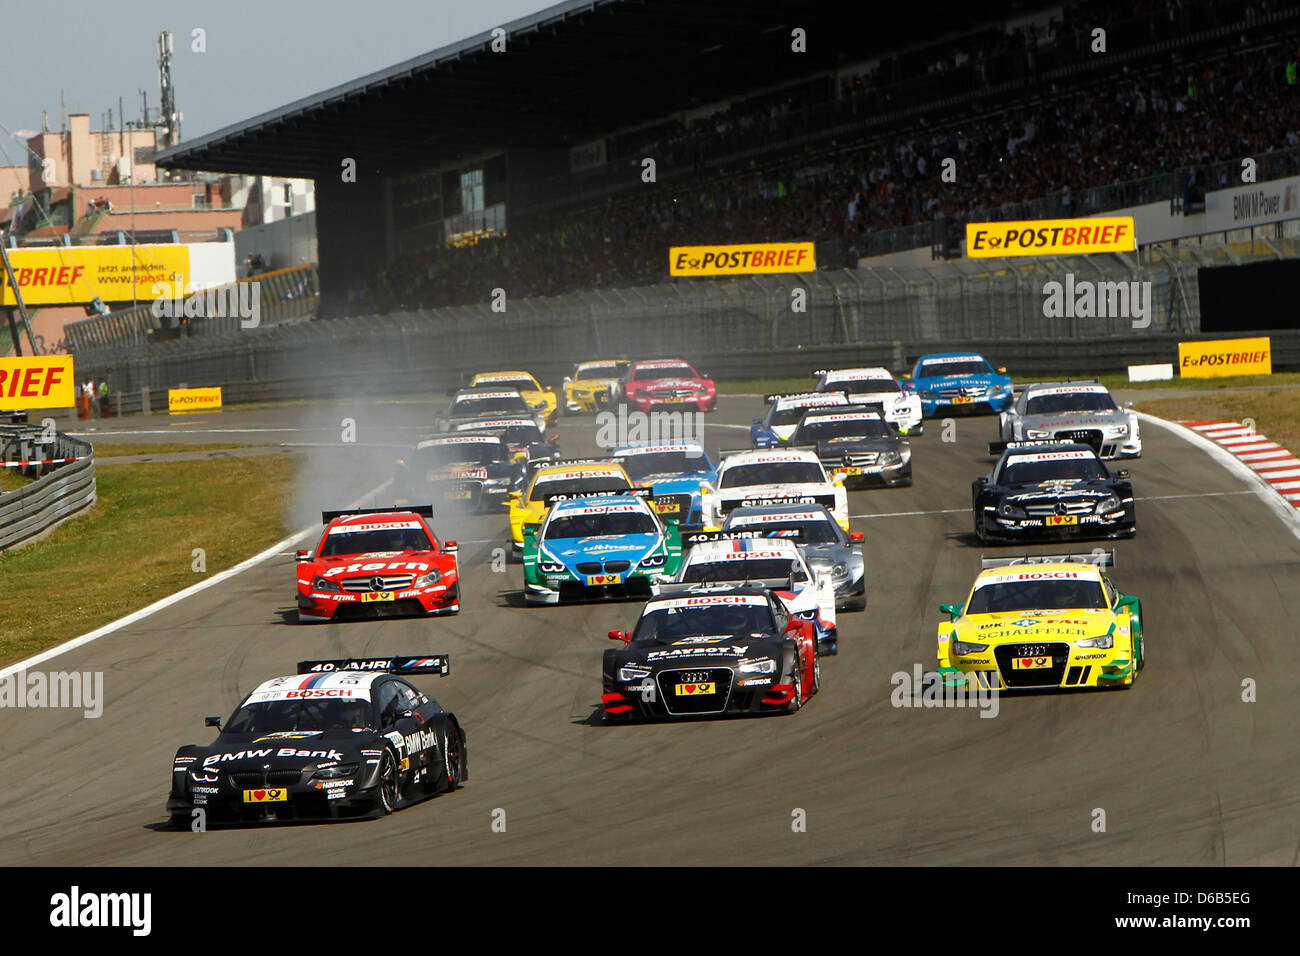 Canadian racing driver Bruno Spengler (L) of BMW leads after the start of the 6th race of the German Touring Car Masters (DTM) at the Nuerburgring, Gerrmany, 19 August 2012. Photo: JUERGEN TAP Stock Photo